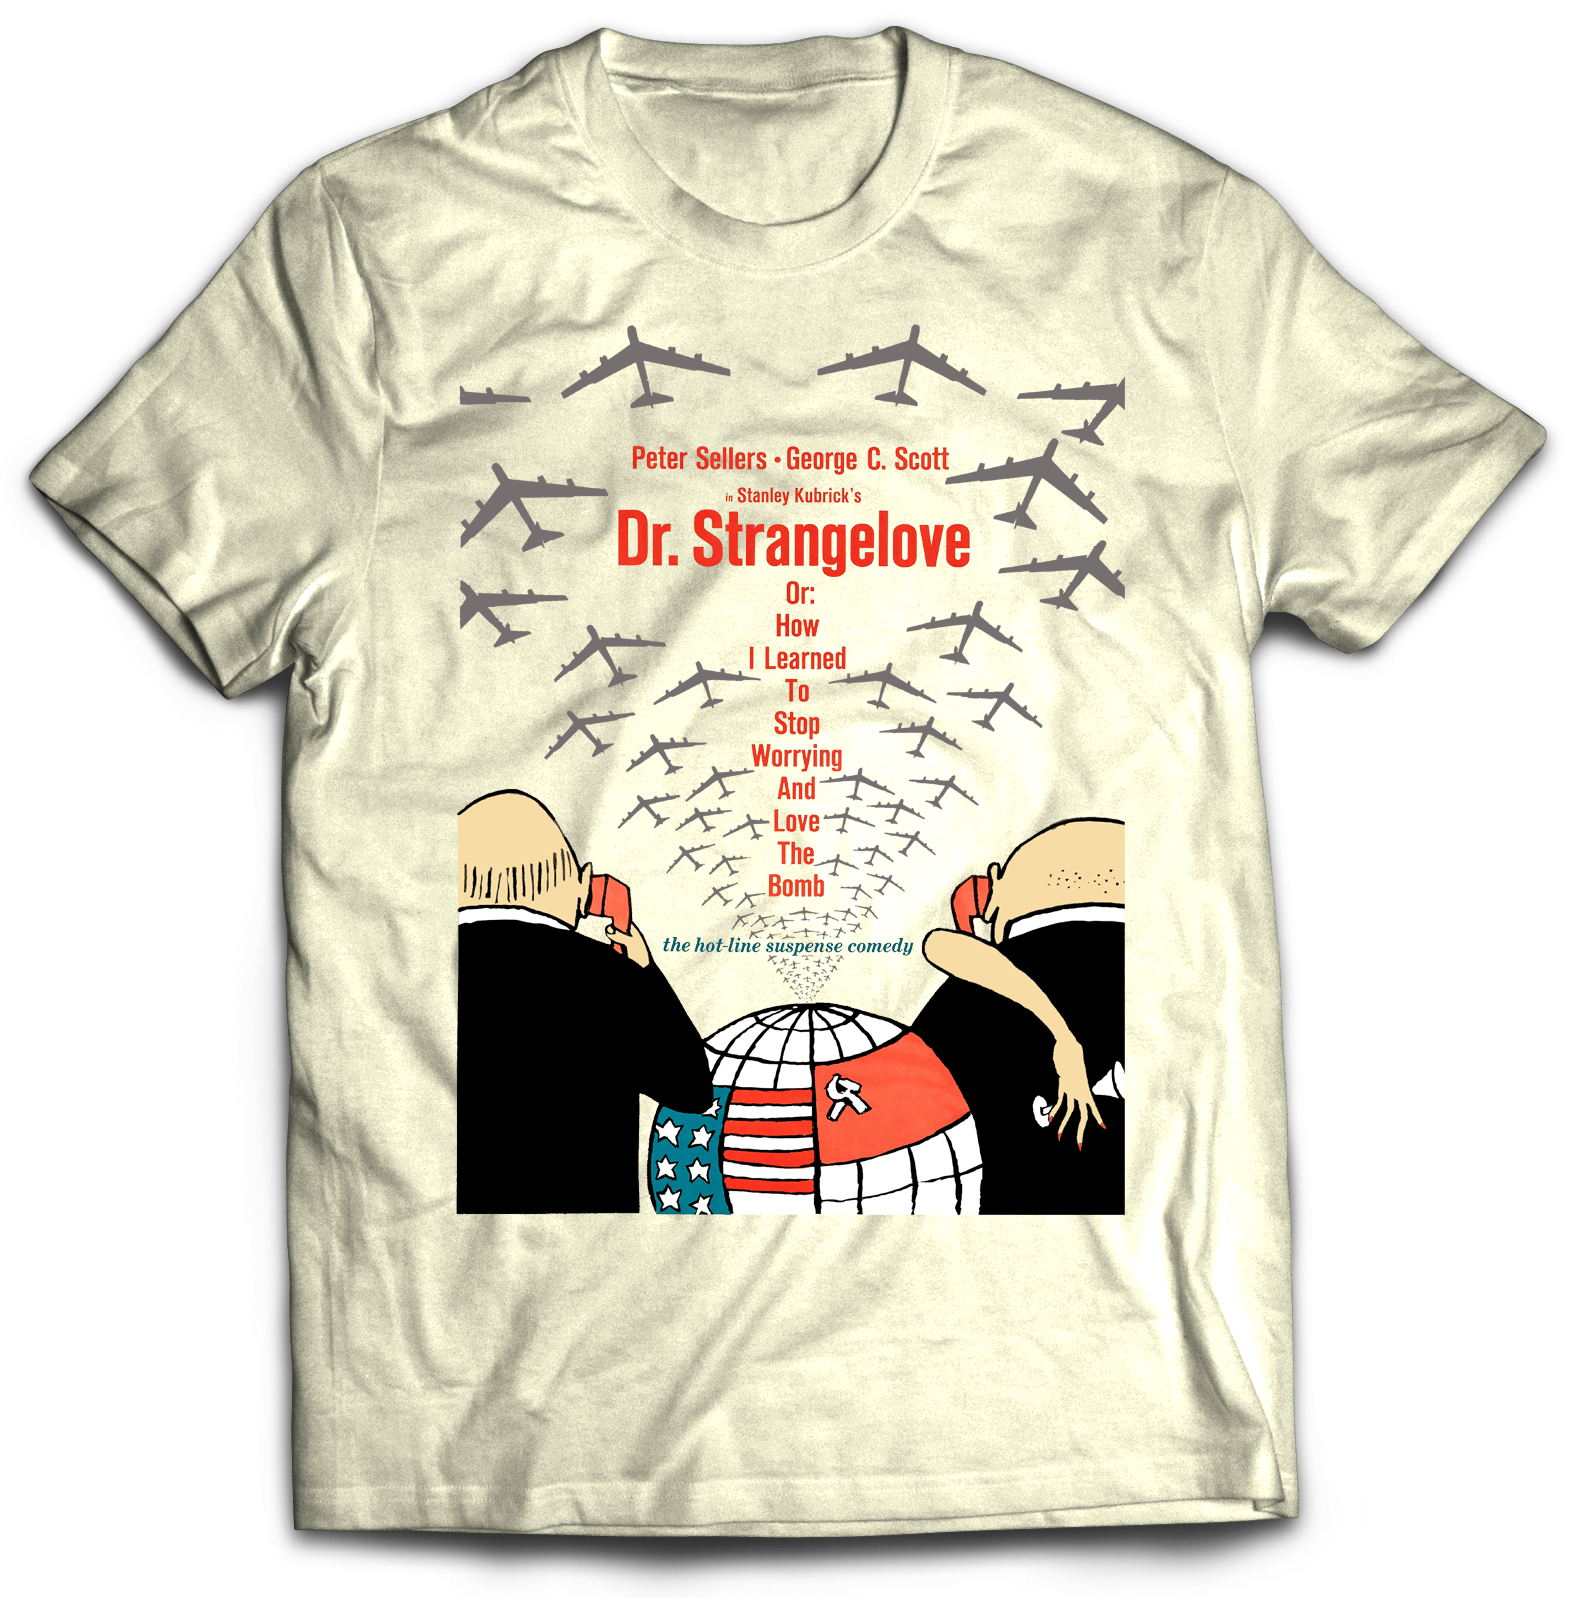 DR. STRANGELOVE, OR:  HOW I LEARNED TO STOP WORRYING AND LOVE THE BOMB - USA POSTER NATURAL T-SHIRT